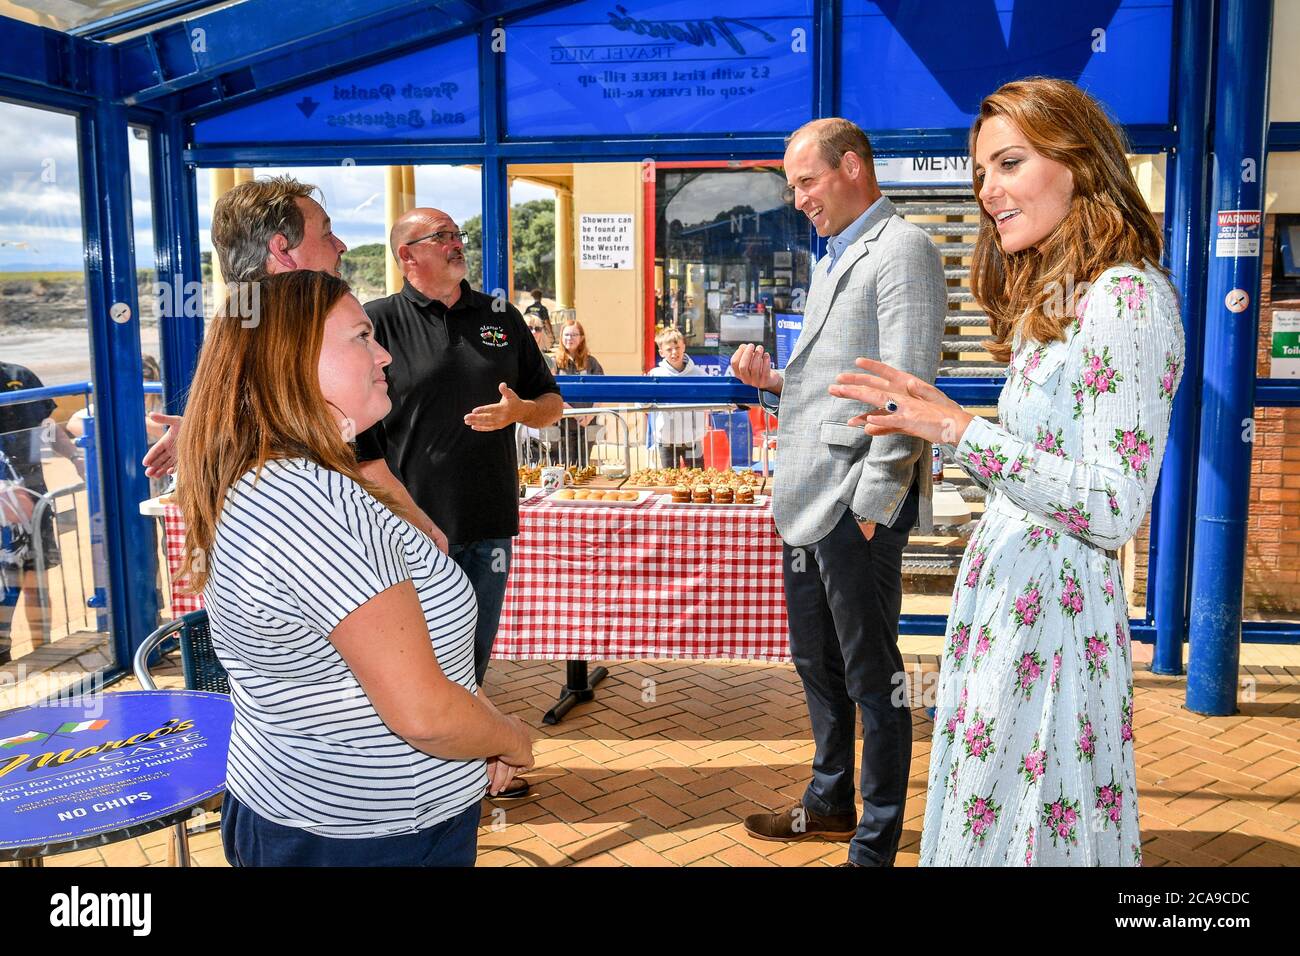 The Duke and Duchess of Cambridge chat with business owners inside Marco's cafe, during their visit to Barry Island, South Wales, to speak to local business owners about the impact of COVID-19 on the tourism sector. Stock Photo